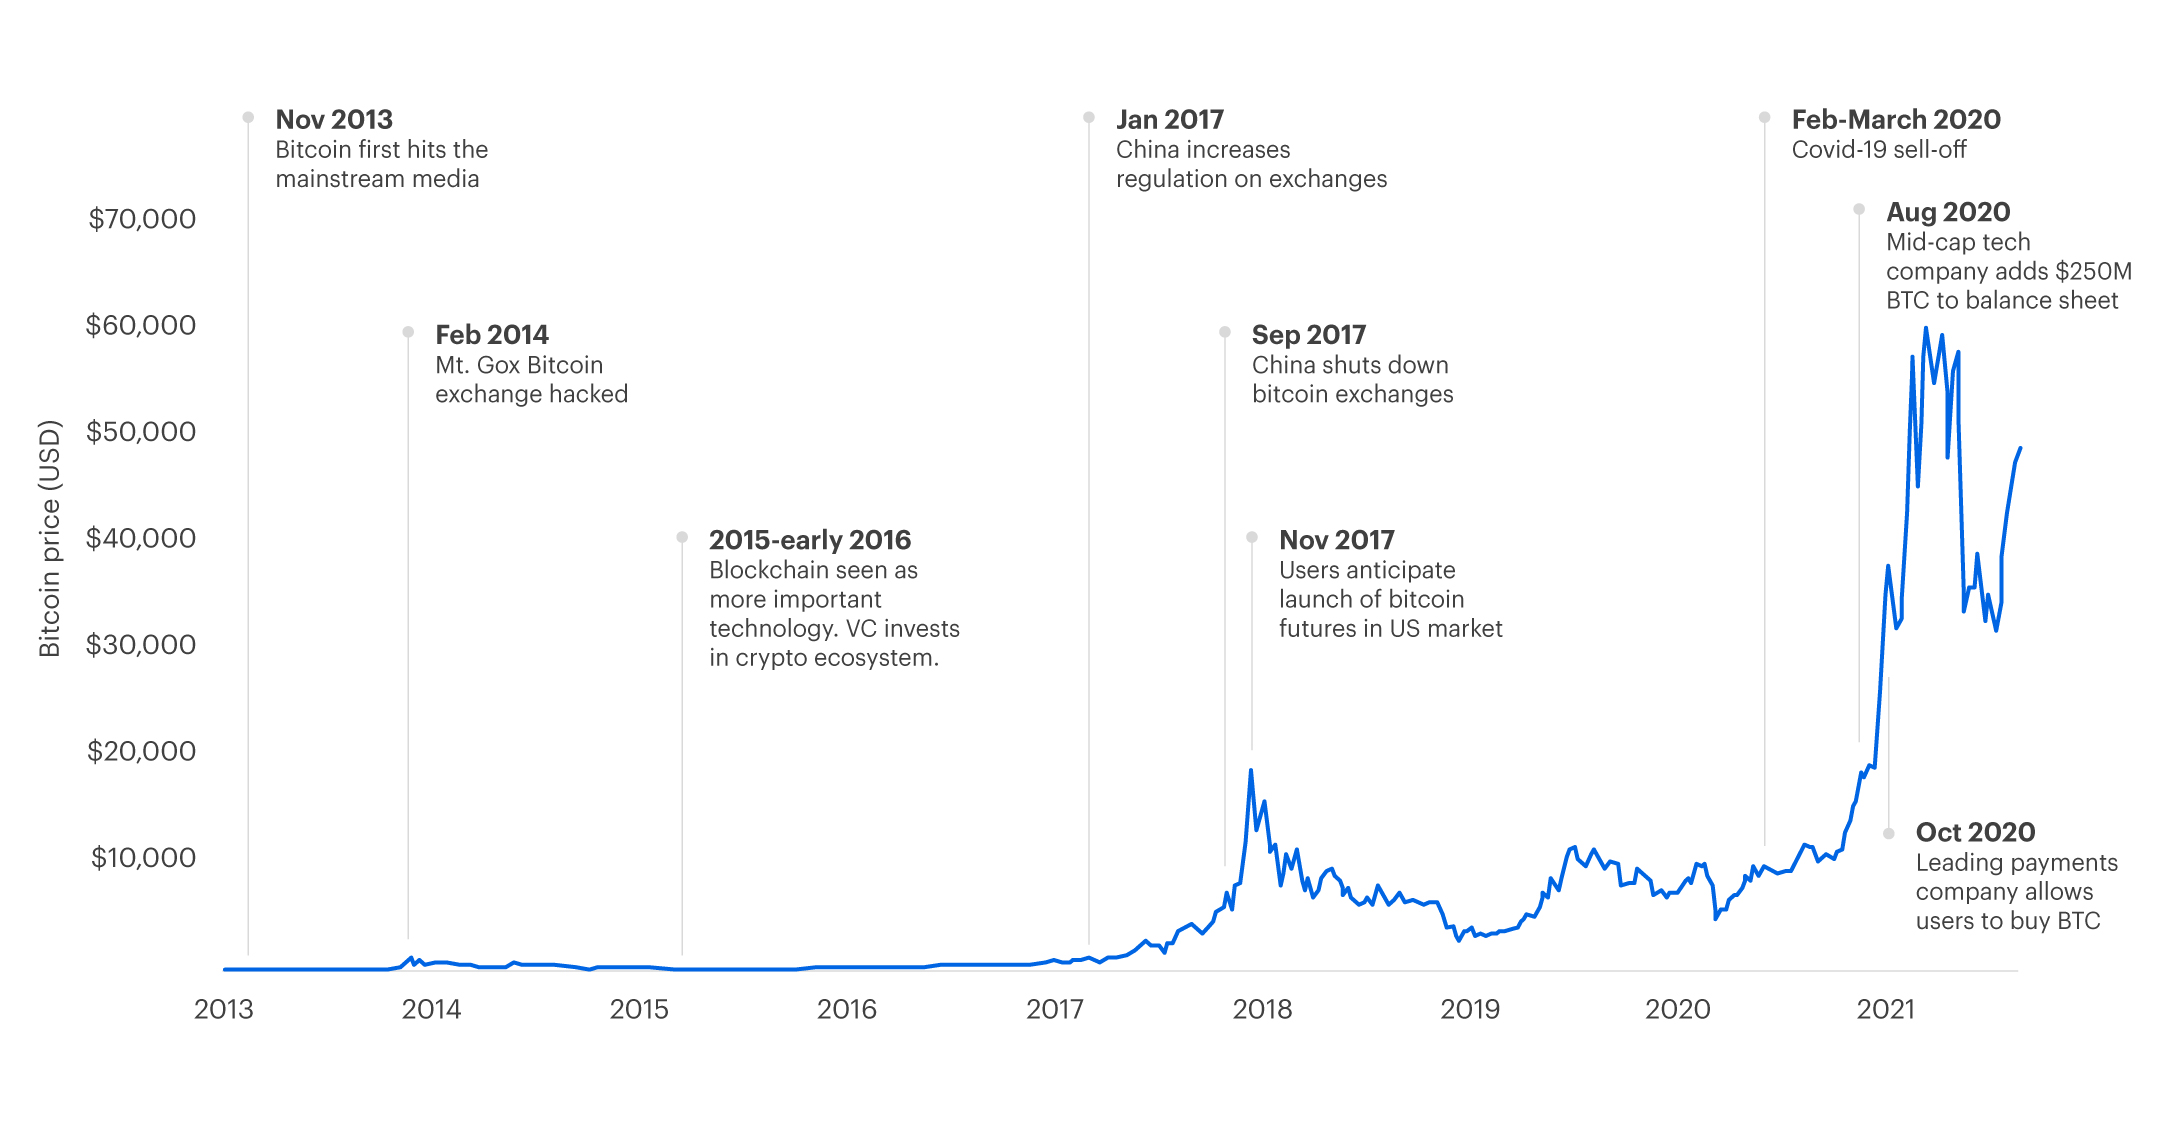 A line chart showing how crypto has evolved since hitting the mainstream media in 2013